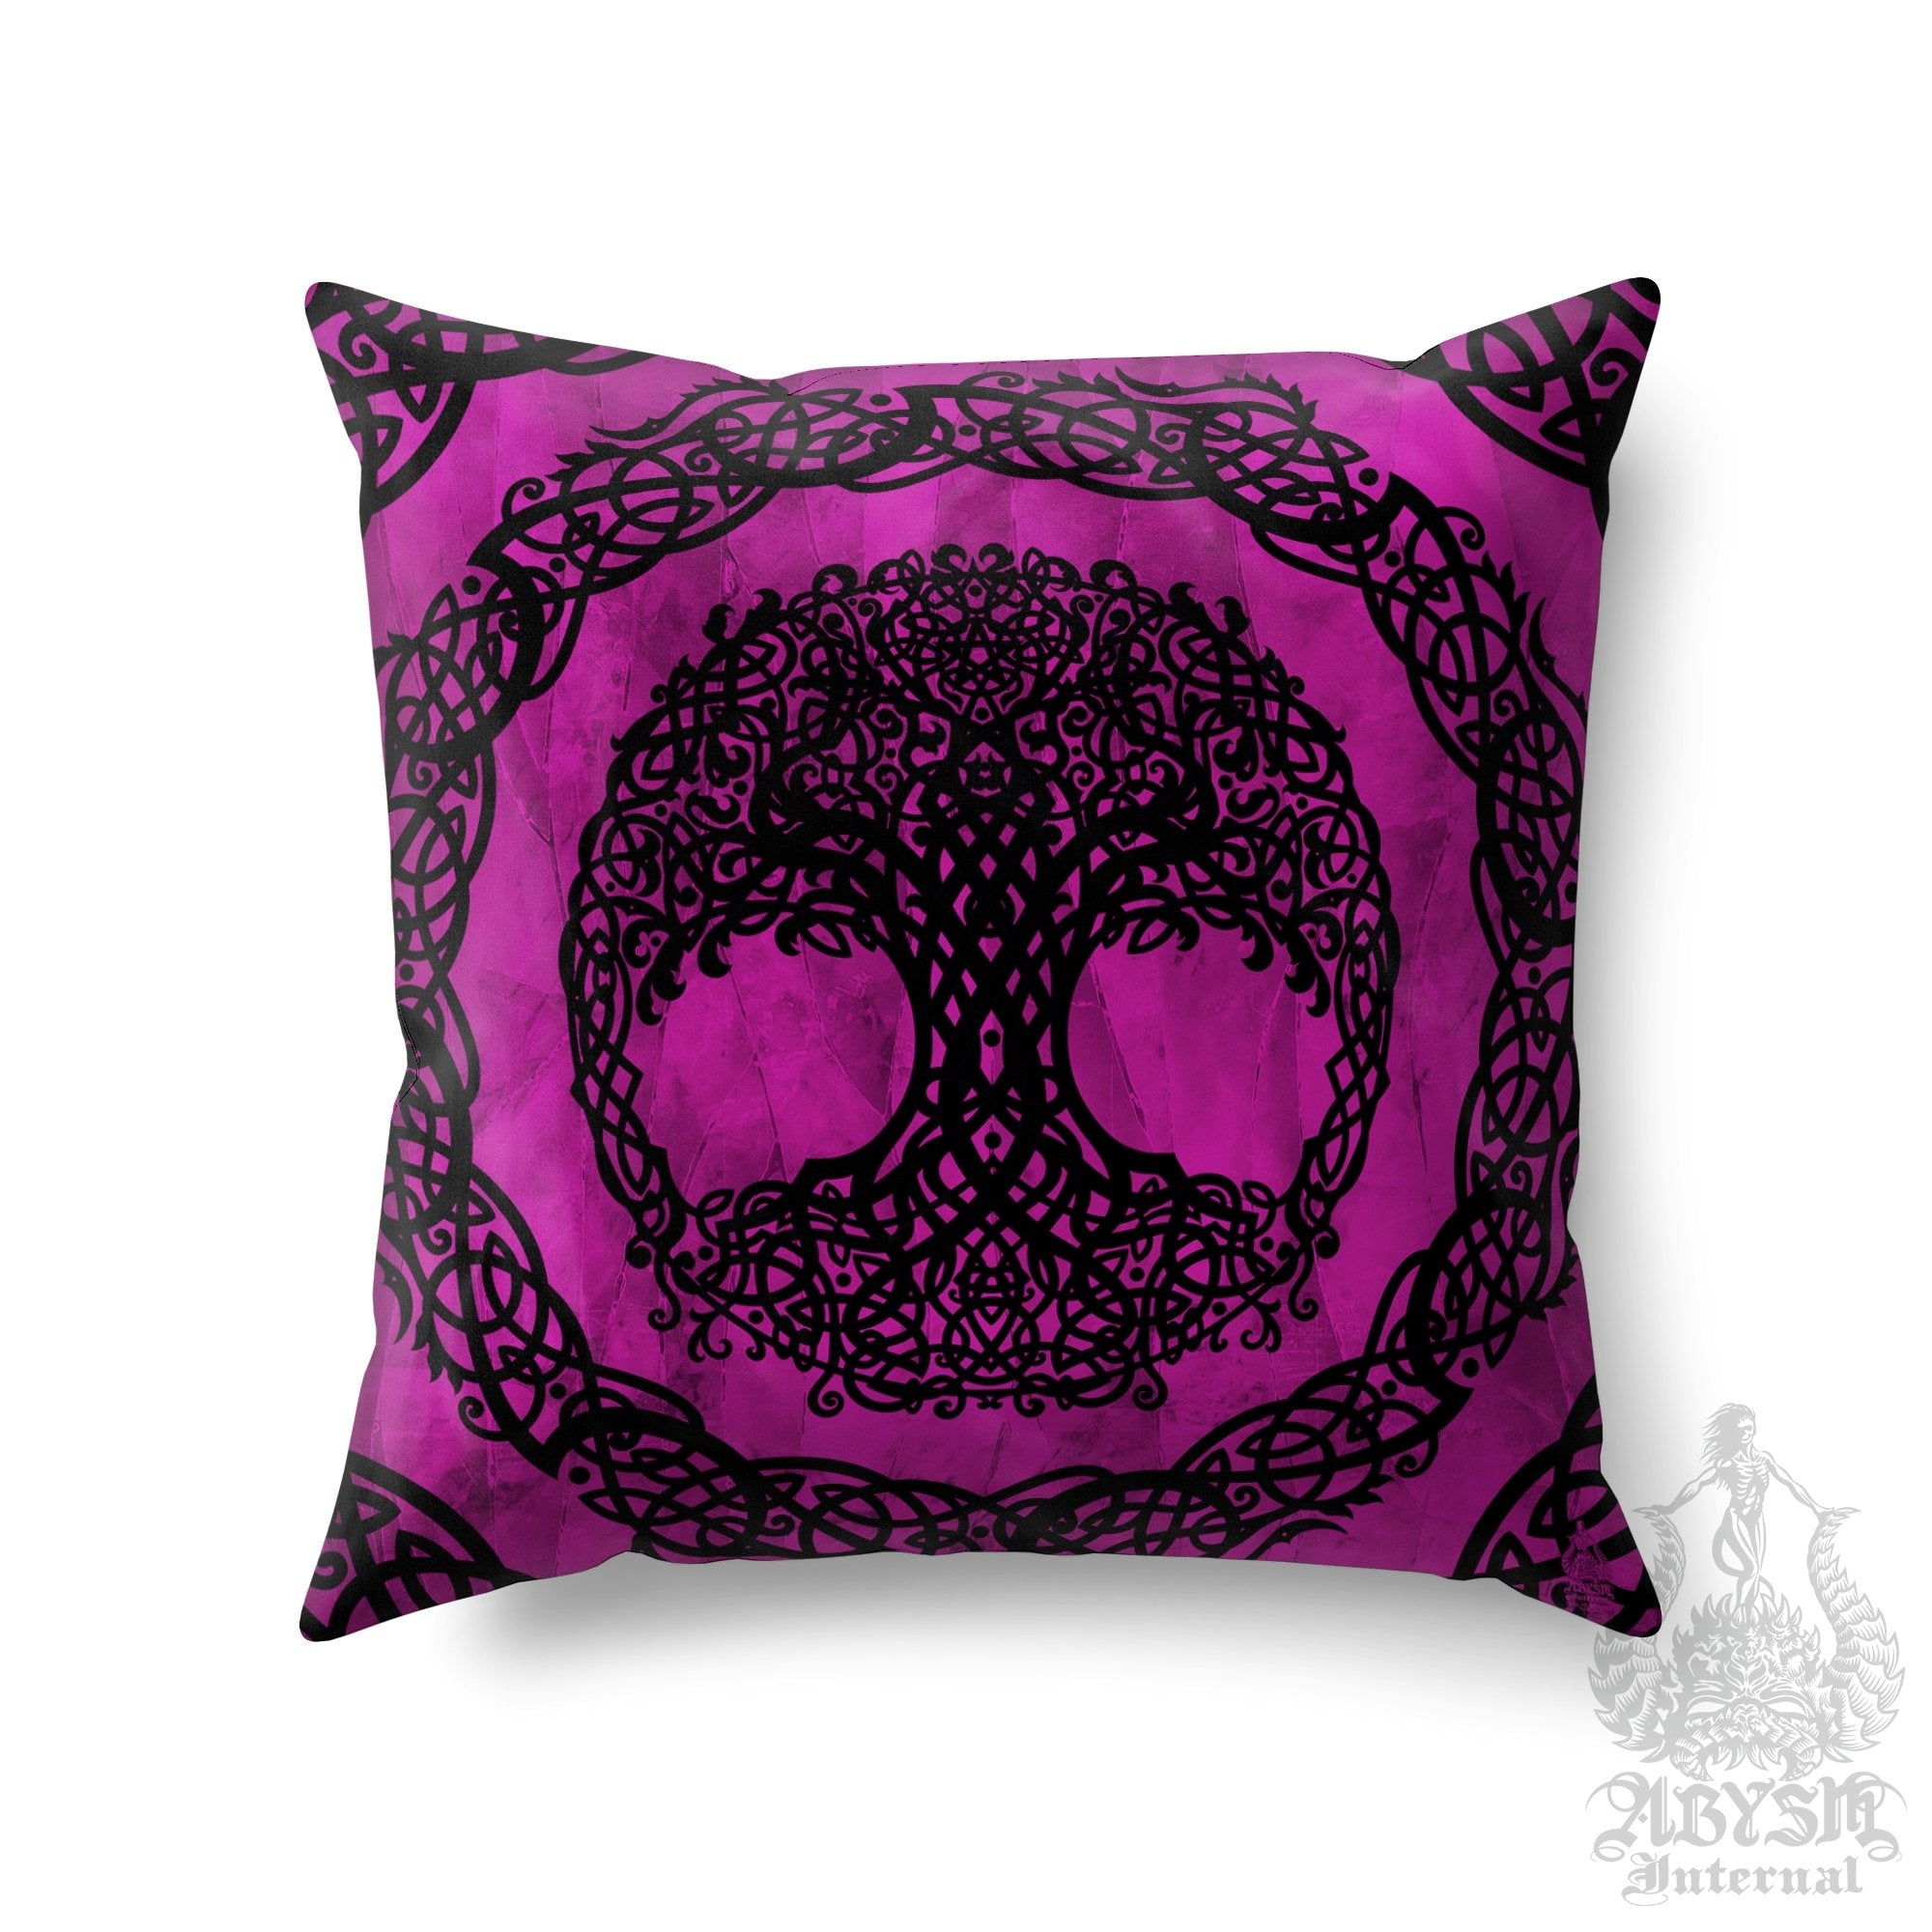 Witchy Throw Pillow, Decorative Accent Cushion, Tree of Life, Witch Room Decor, Celtic Art, Alternative Home - Pink Black - Abysm Internal